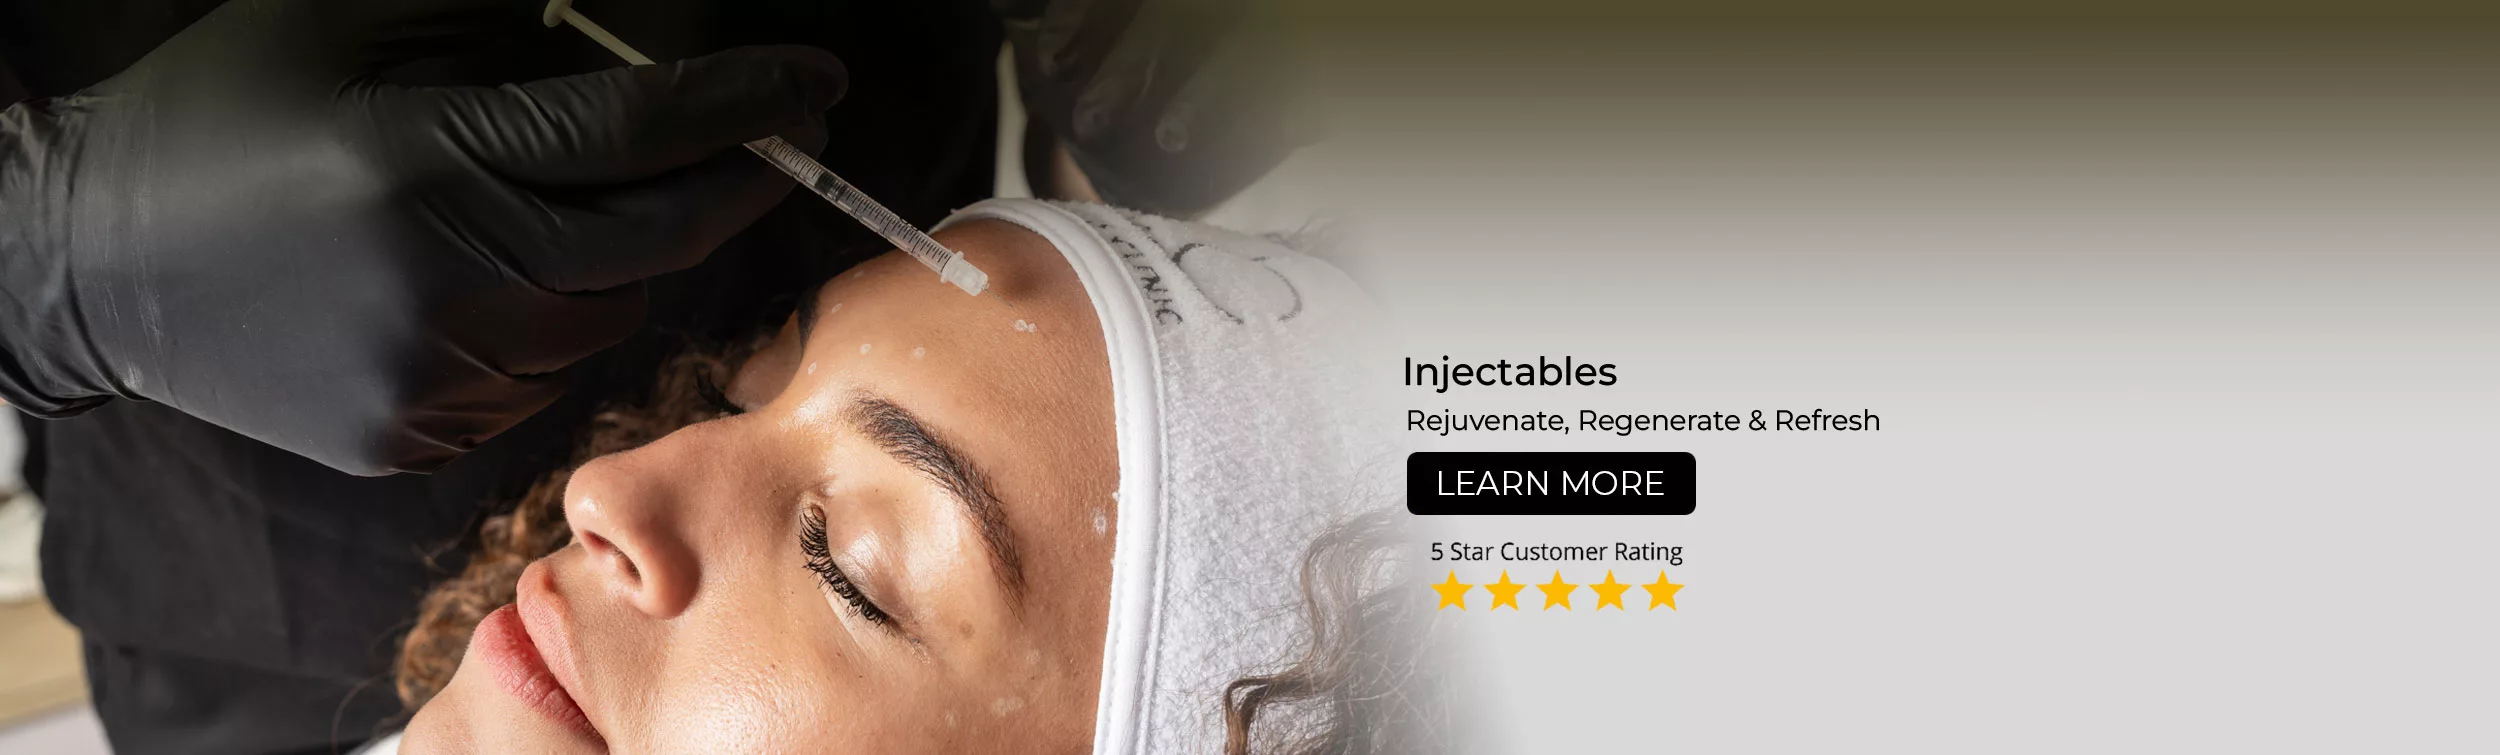 Axis-Banner-injectables